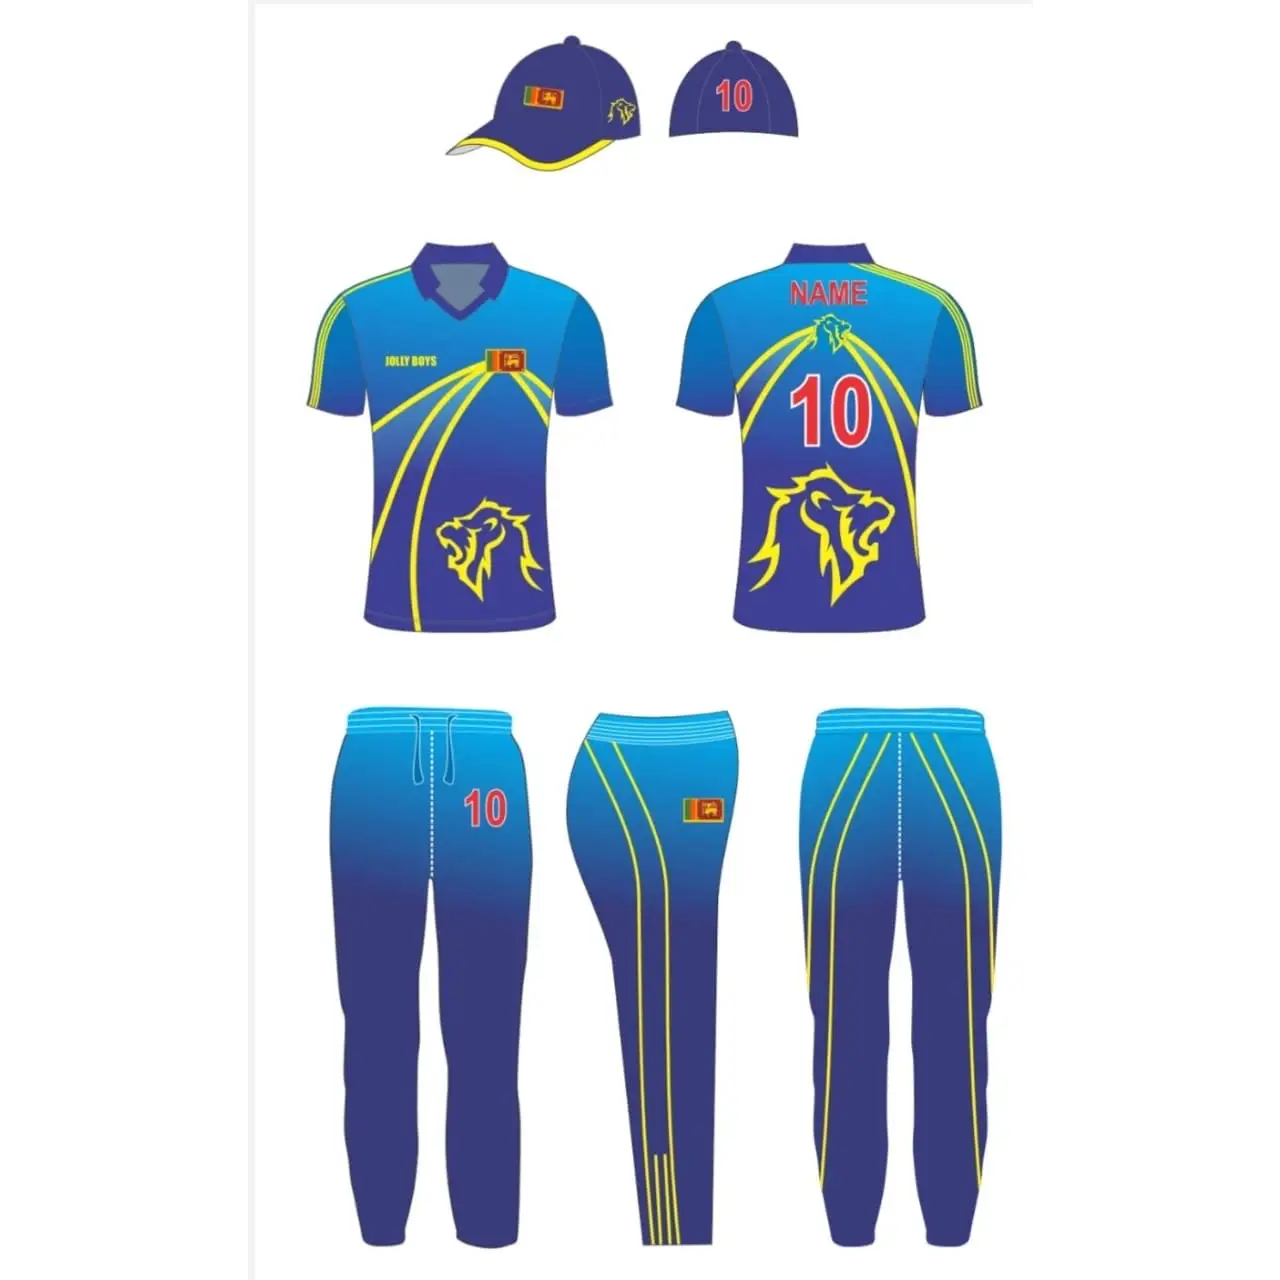 Cricket Color Uniform Kit Customized Light Blue Yellow Shirt Trouser & Cap - Chat/Call/email for price / Small-XL - CLOTHING CUSTOM